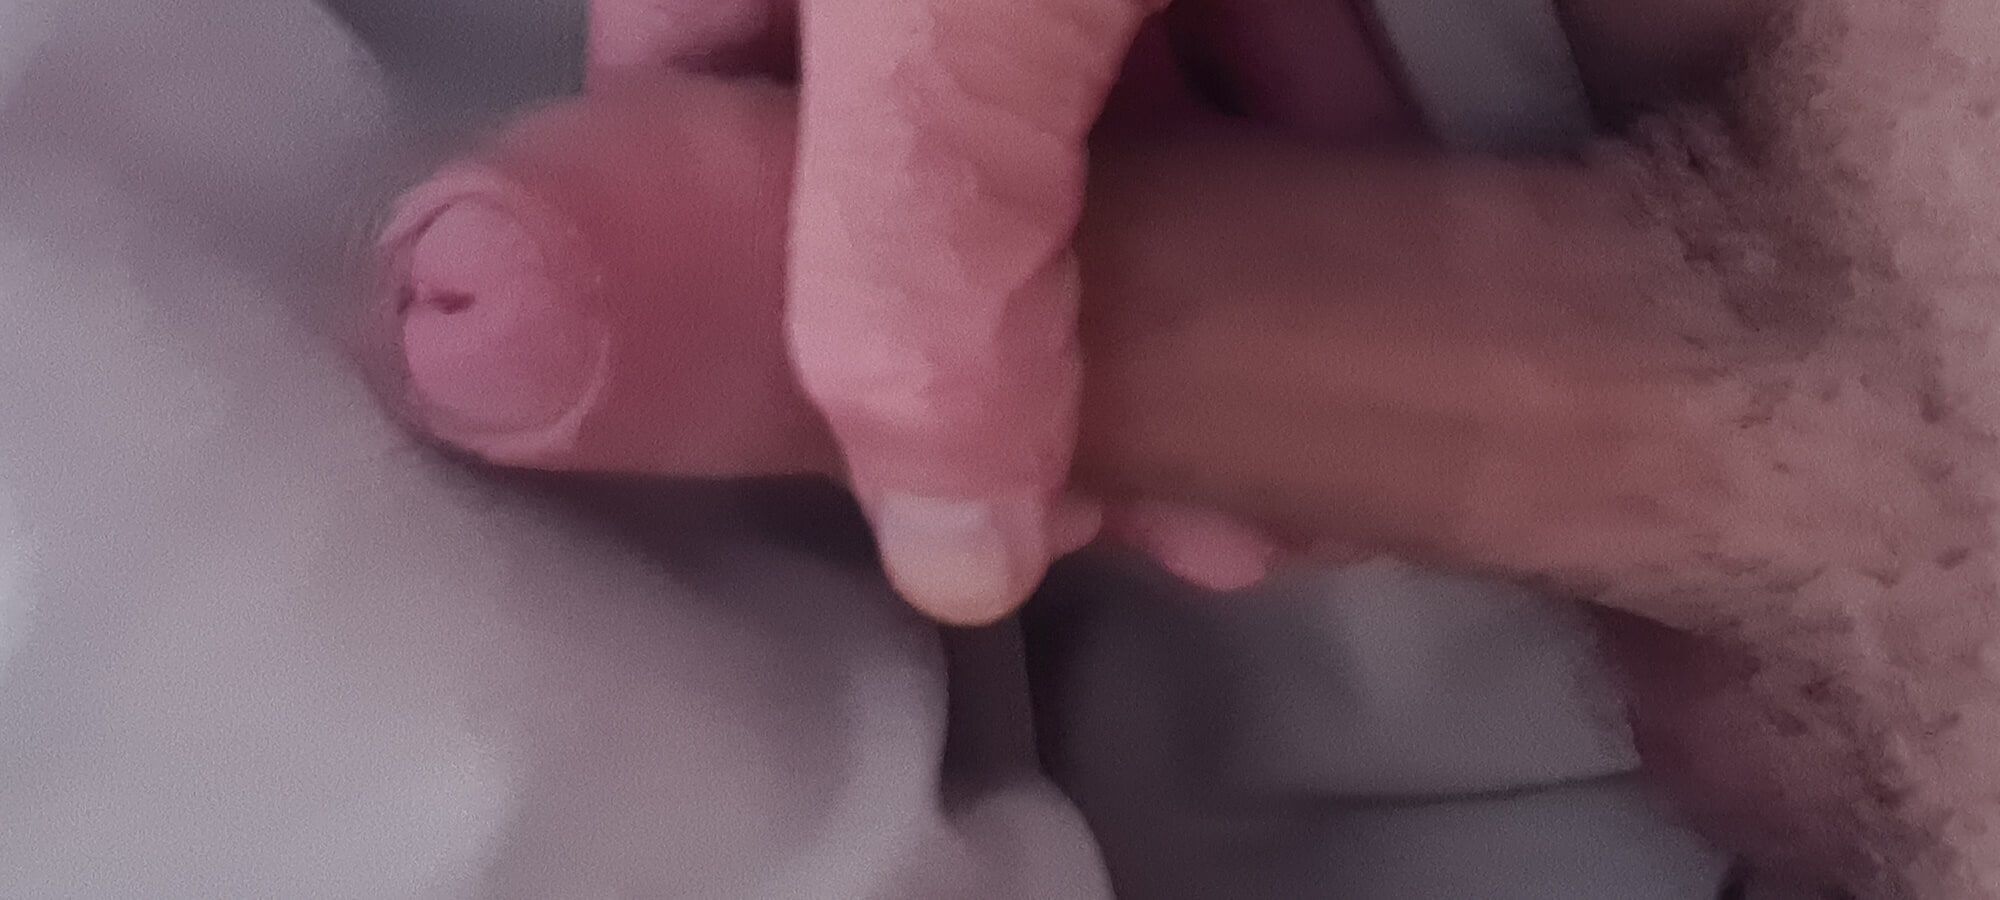 my cock and me #6